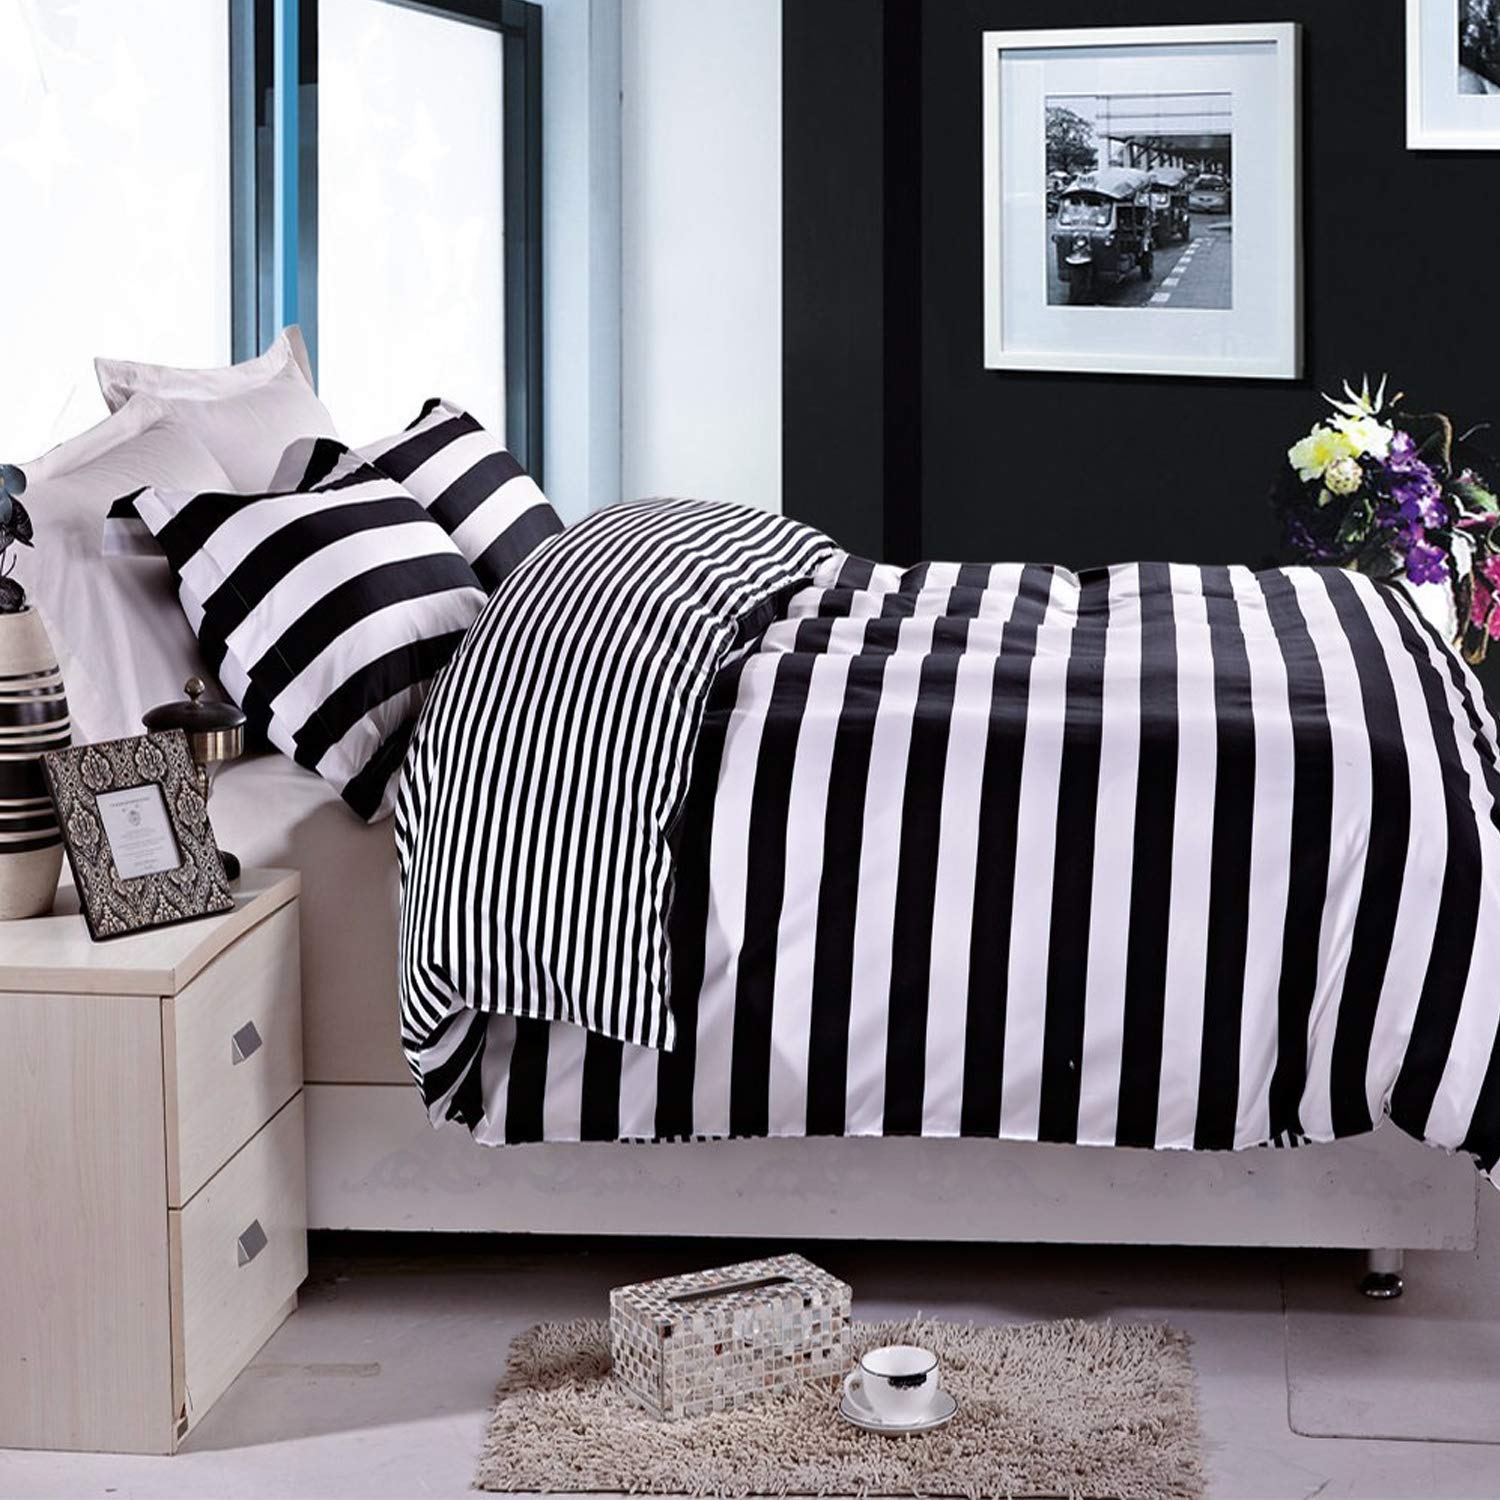 NTBAY 3 Pieces Duvet Cover Set Black and White Stripe Printed Microfiber Reversible Design